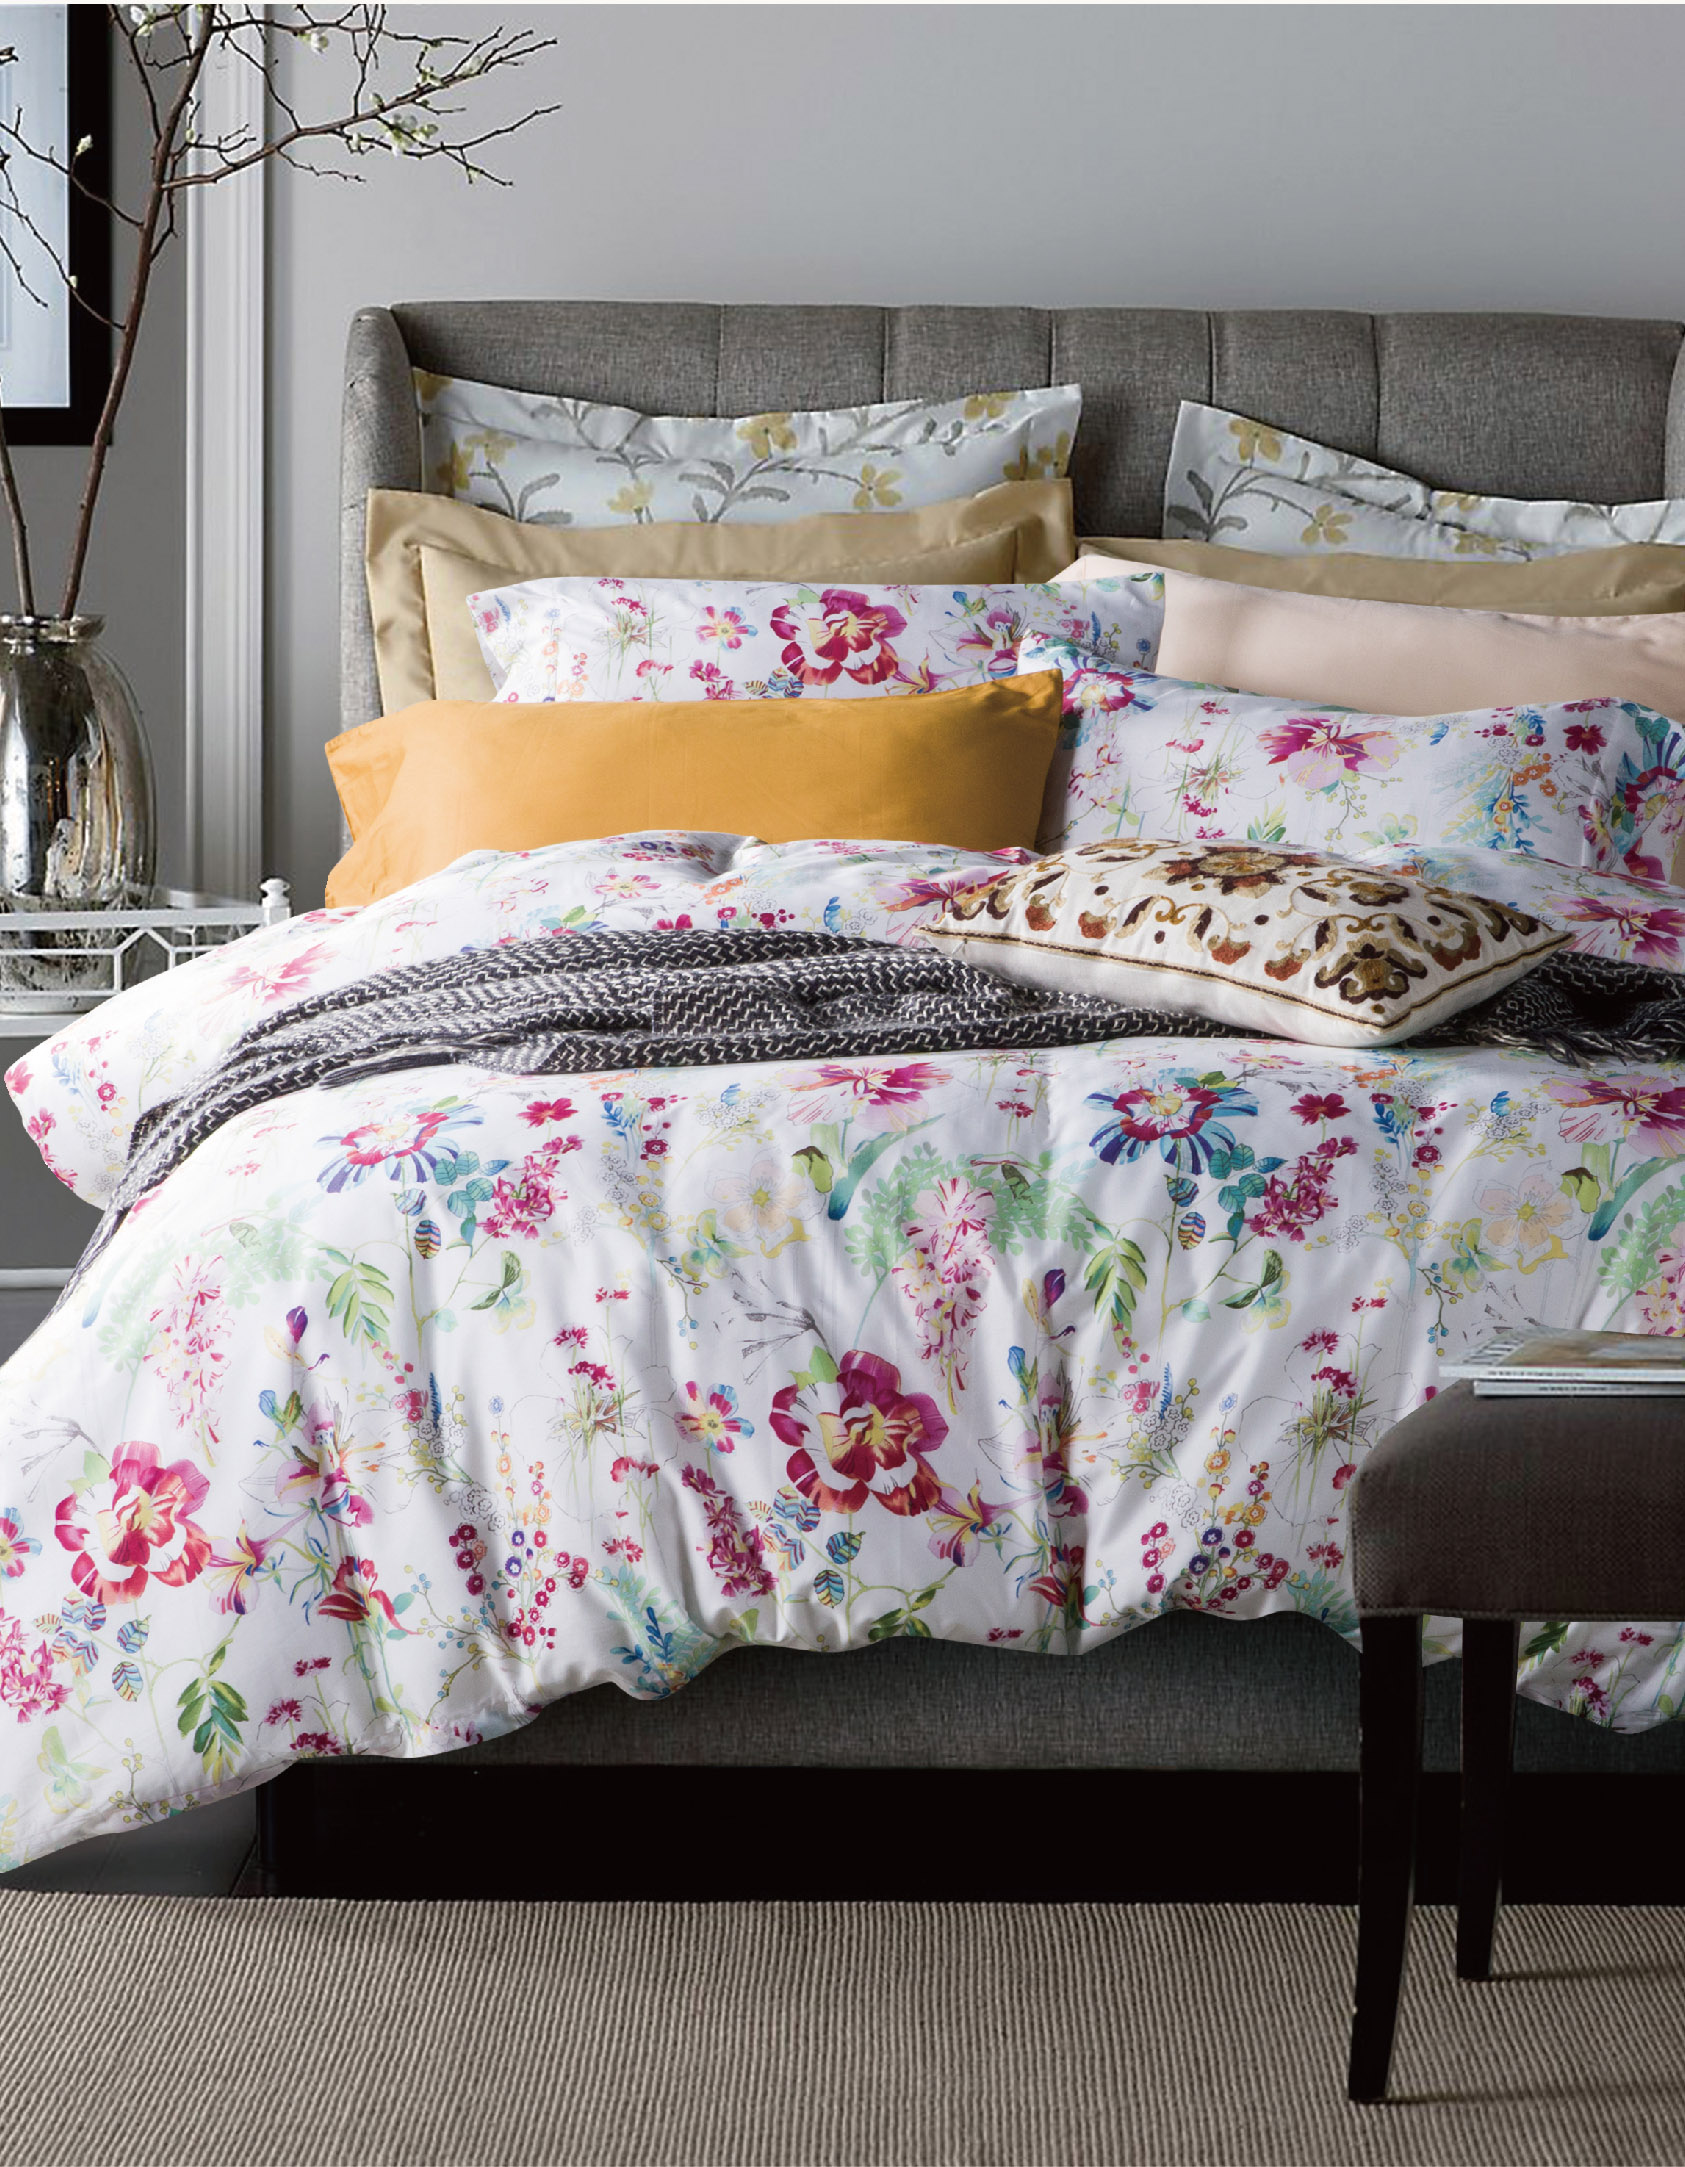 https://www.trendhome.com/wp-content/uploads/2019/01/bedding-fabric-wholesale-china-supplier-exporter-and-wholesaler-100-cotton-60-60-200-98-001.jpg